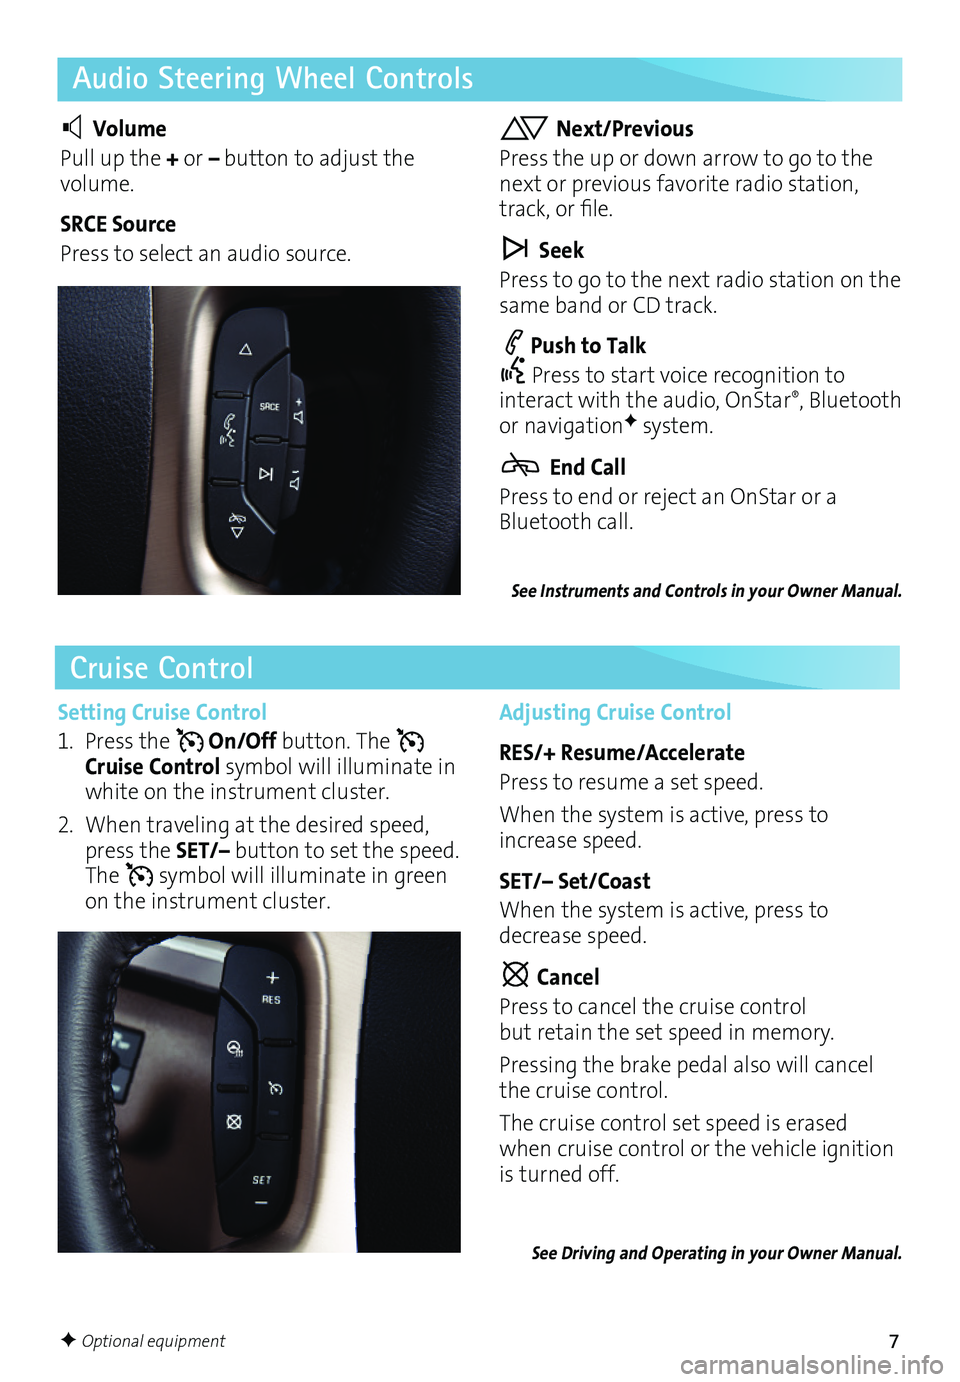 BUICK ENCLAVE 2017  Get To Know Guide 7
Audio Steering Wheel Controls
Cruise Control
  Volume
Pull up the + or – button to adjust the volume.
SRCE Source
Press to select an audio source.
 Next/Previous
Press the up or down arrow to go t